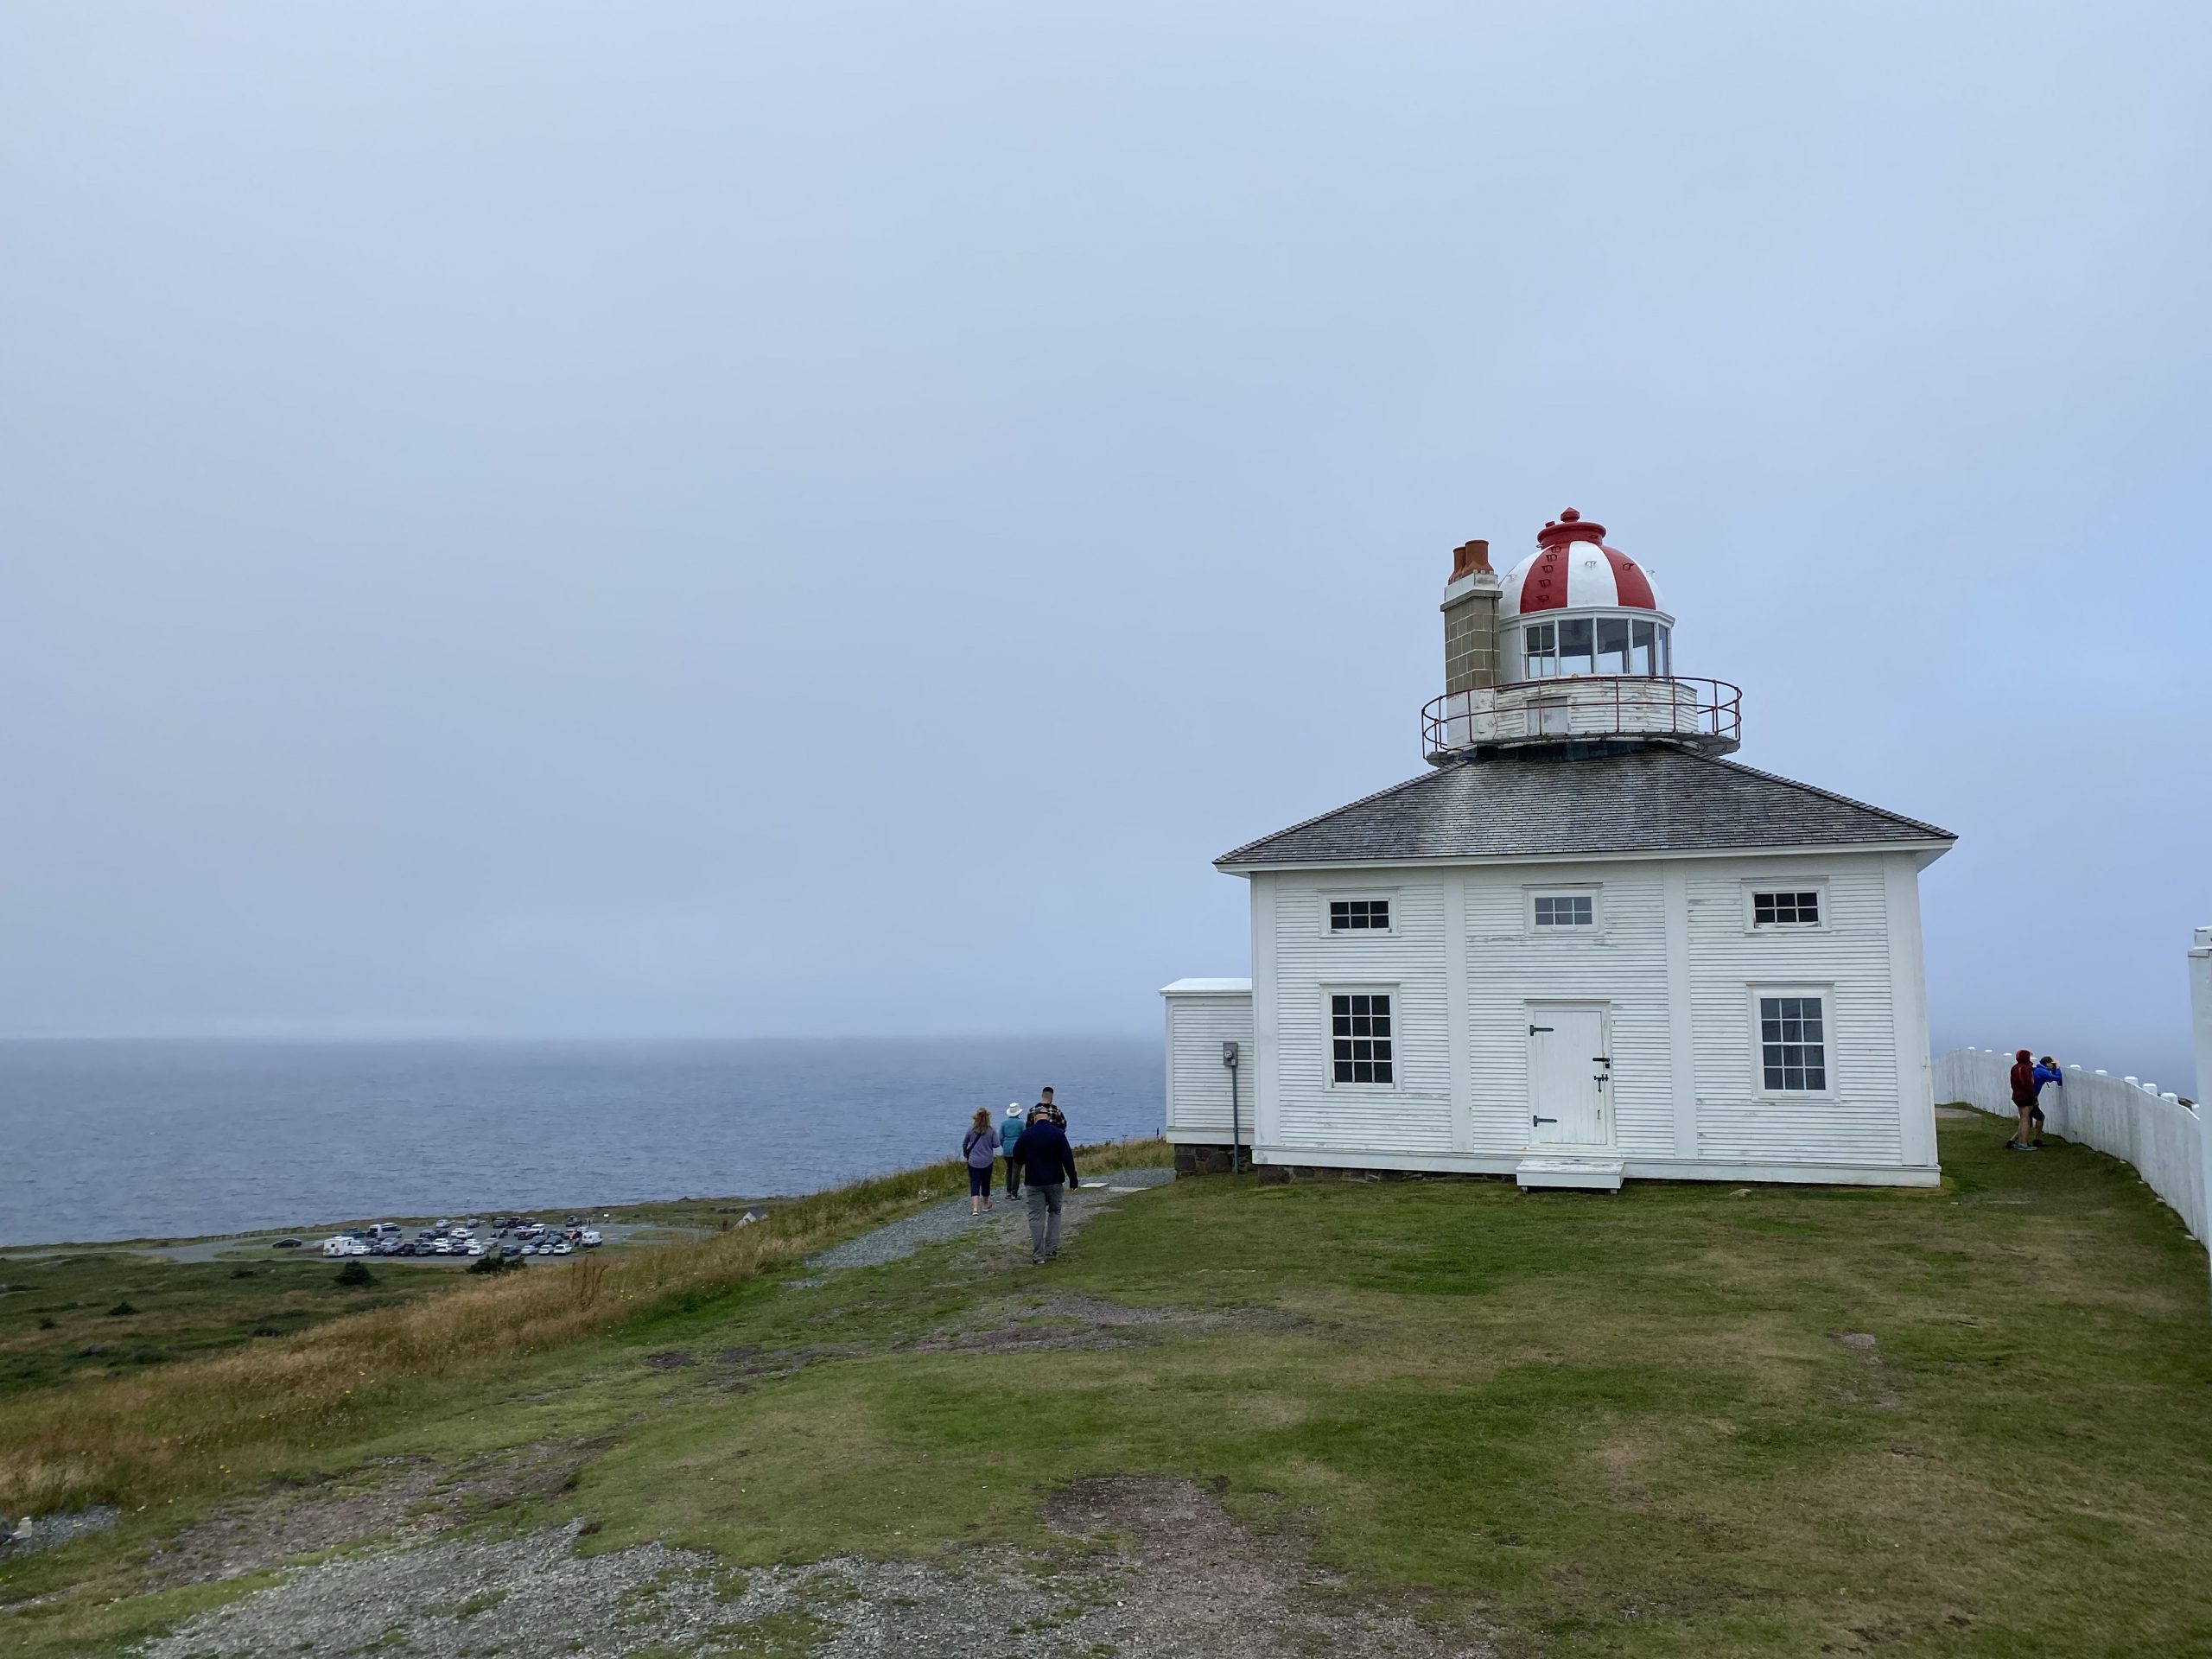 The old Cape Spear lighthouse, which was used from 1835 to 1955.